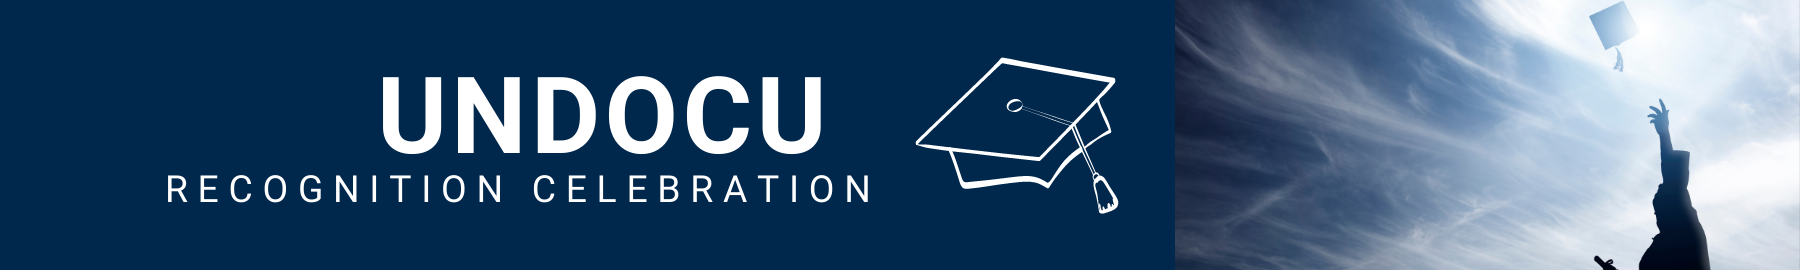 Blue banner with text Undocu recognition celebration and photo of graduate throwing cap